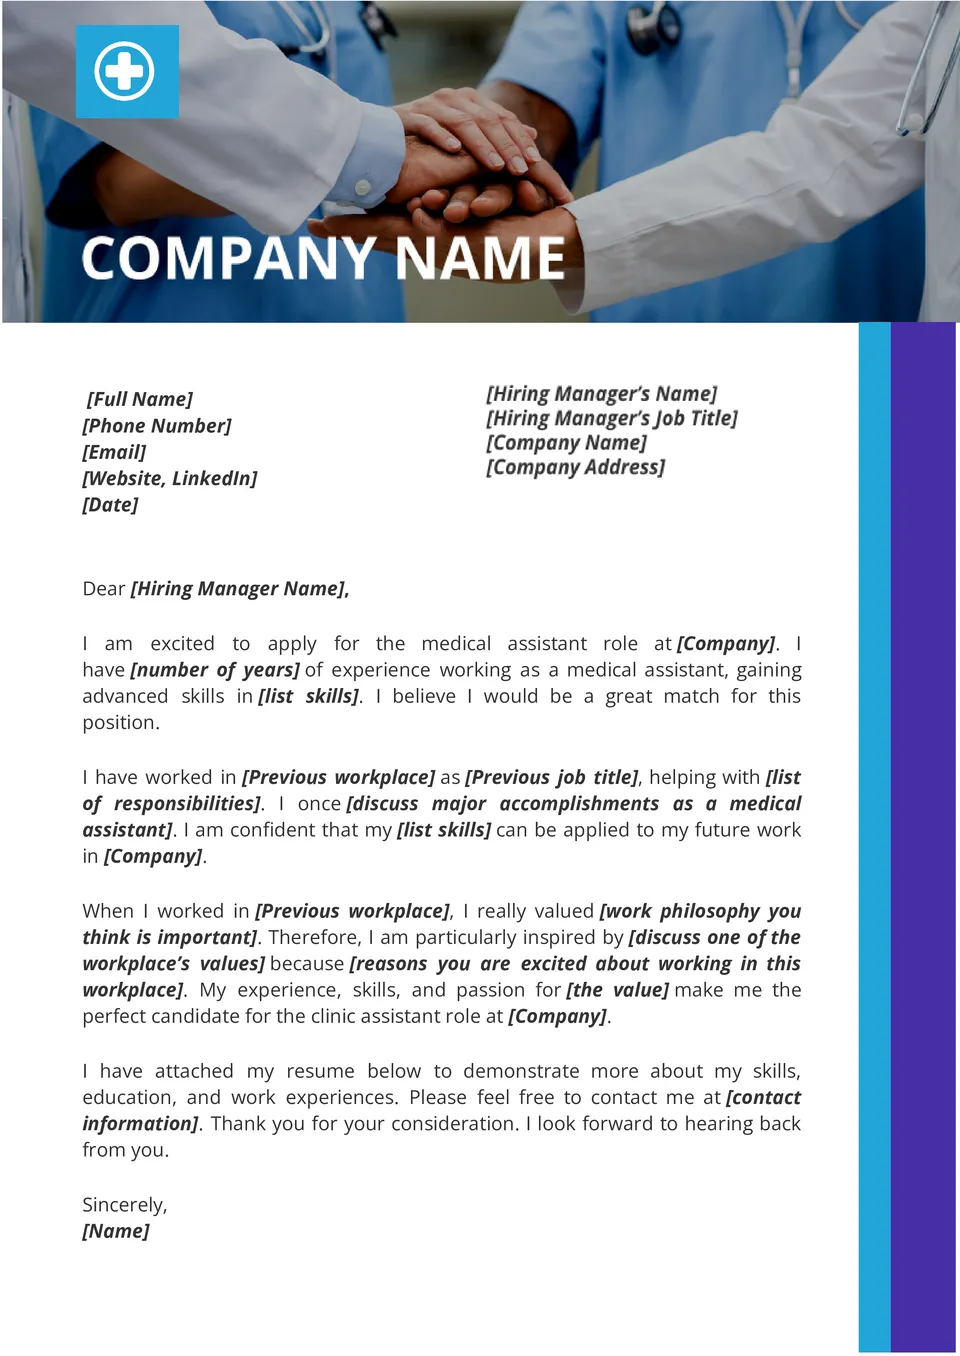 Medical Assistant Cover Letter Template